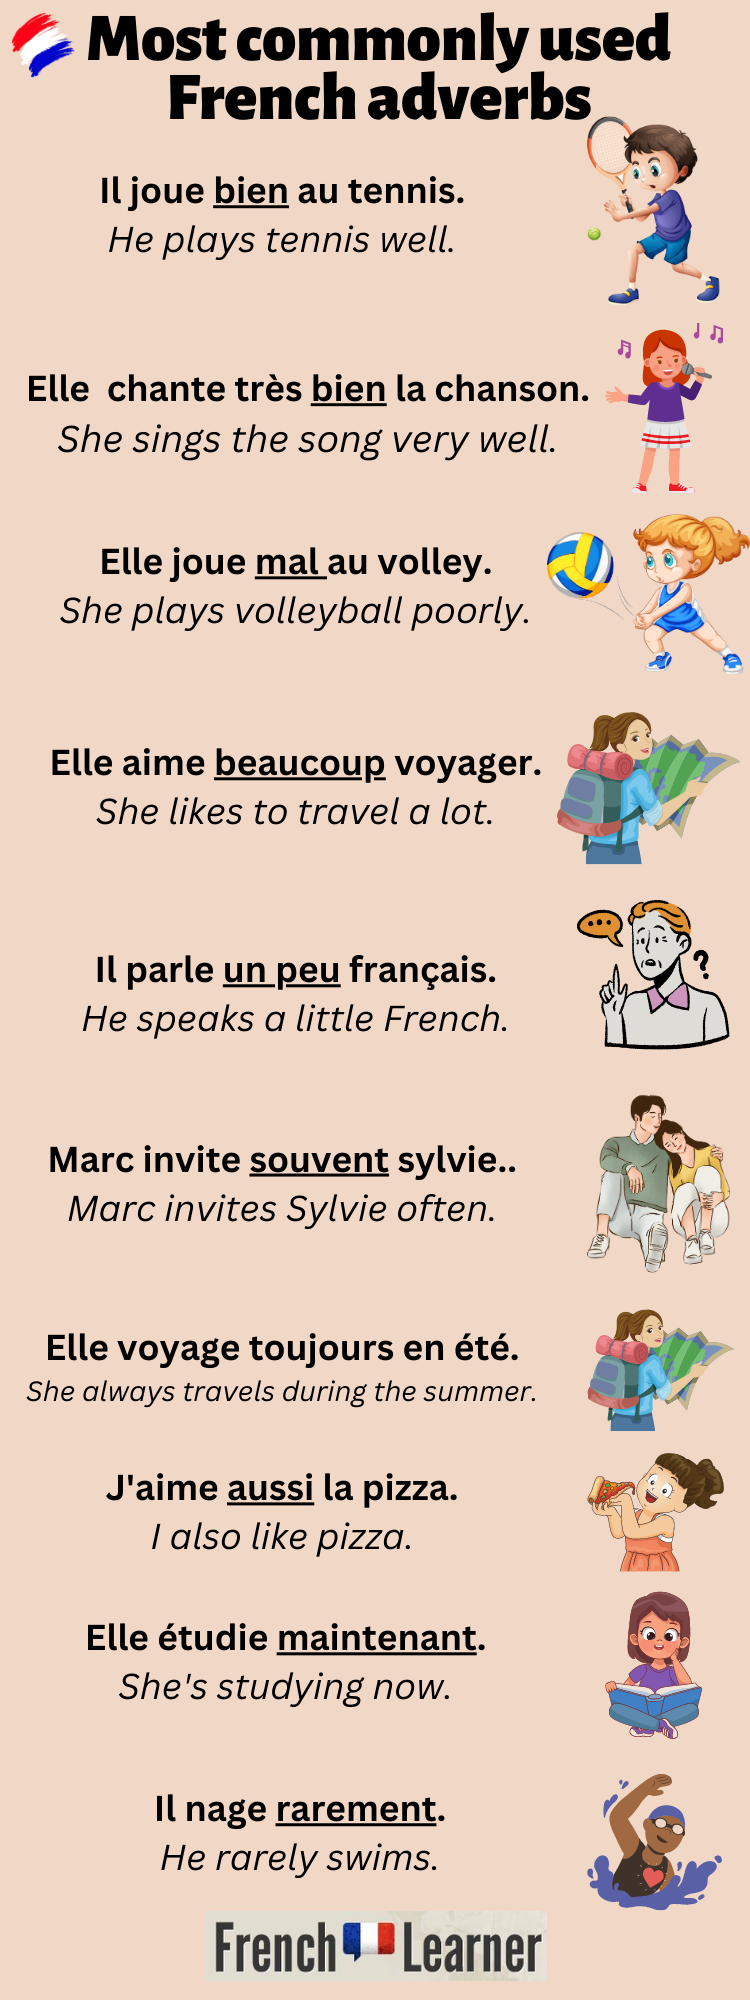 how-to-form-use-french-adverbs-100-essential-words